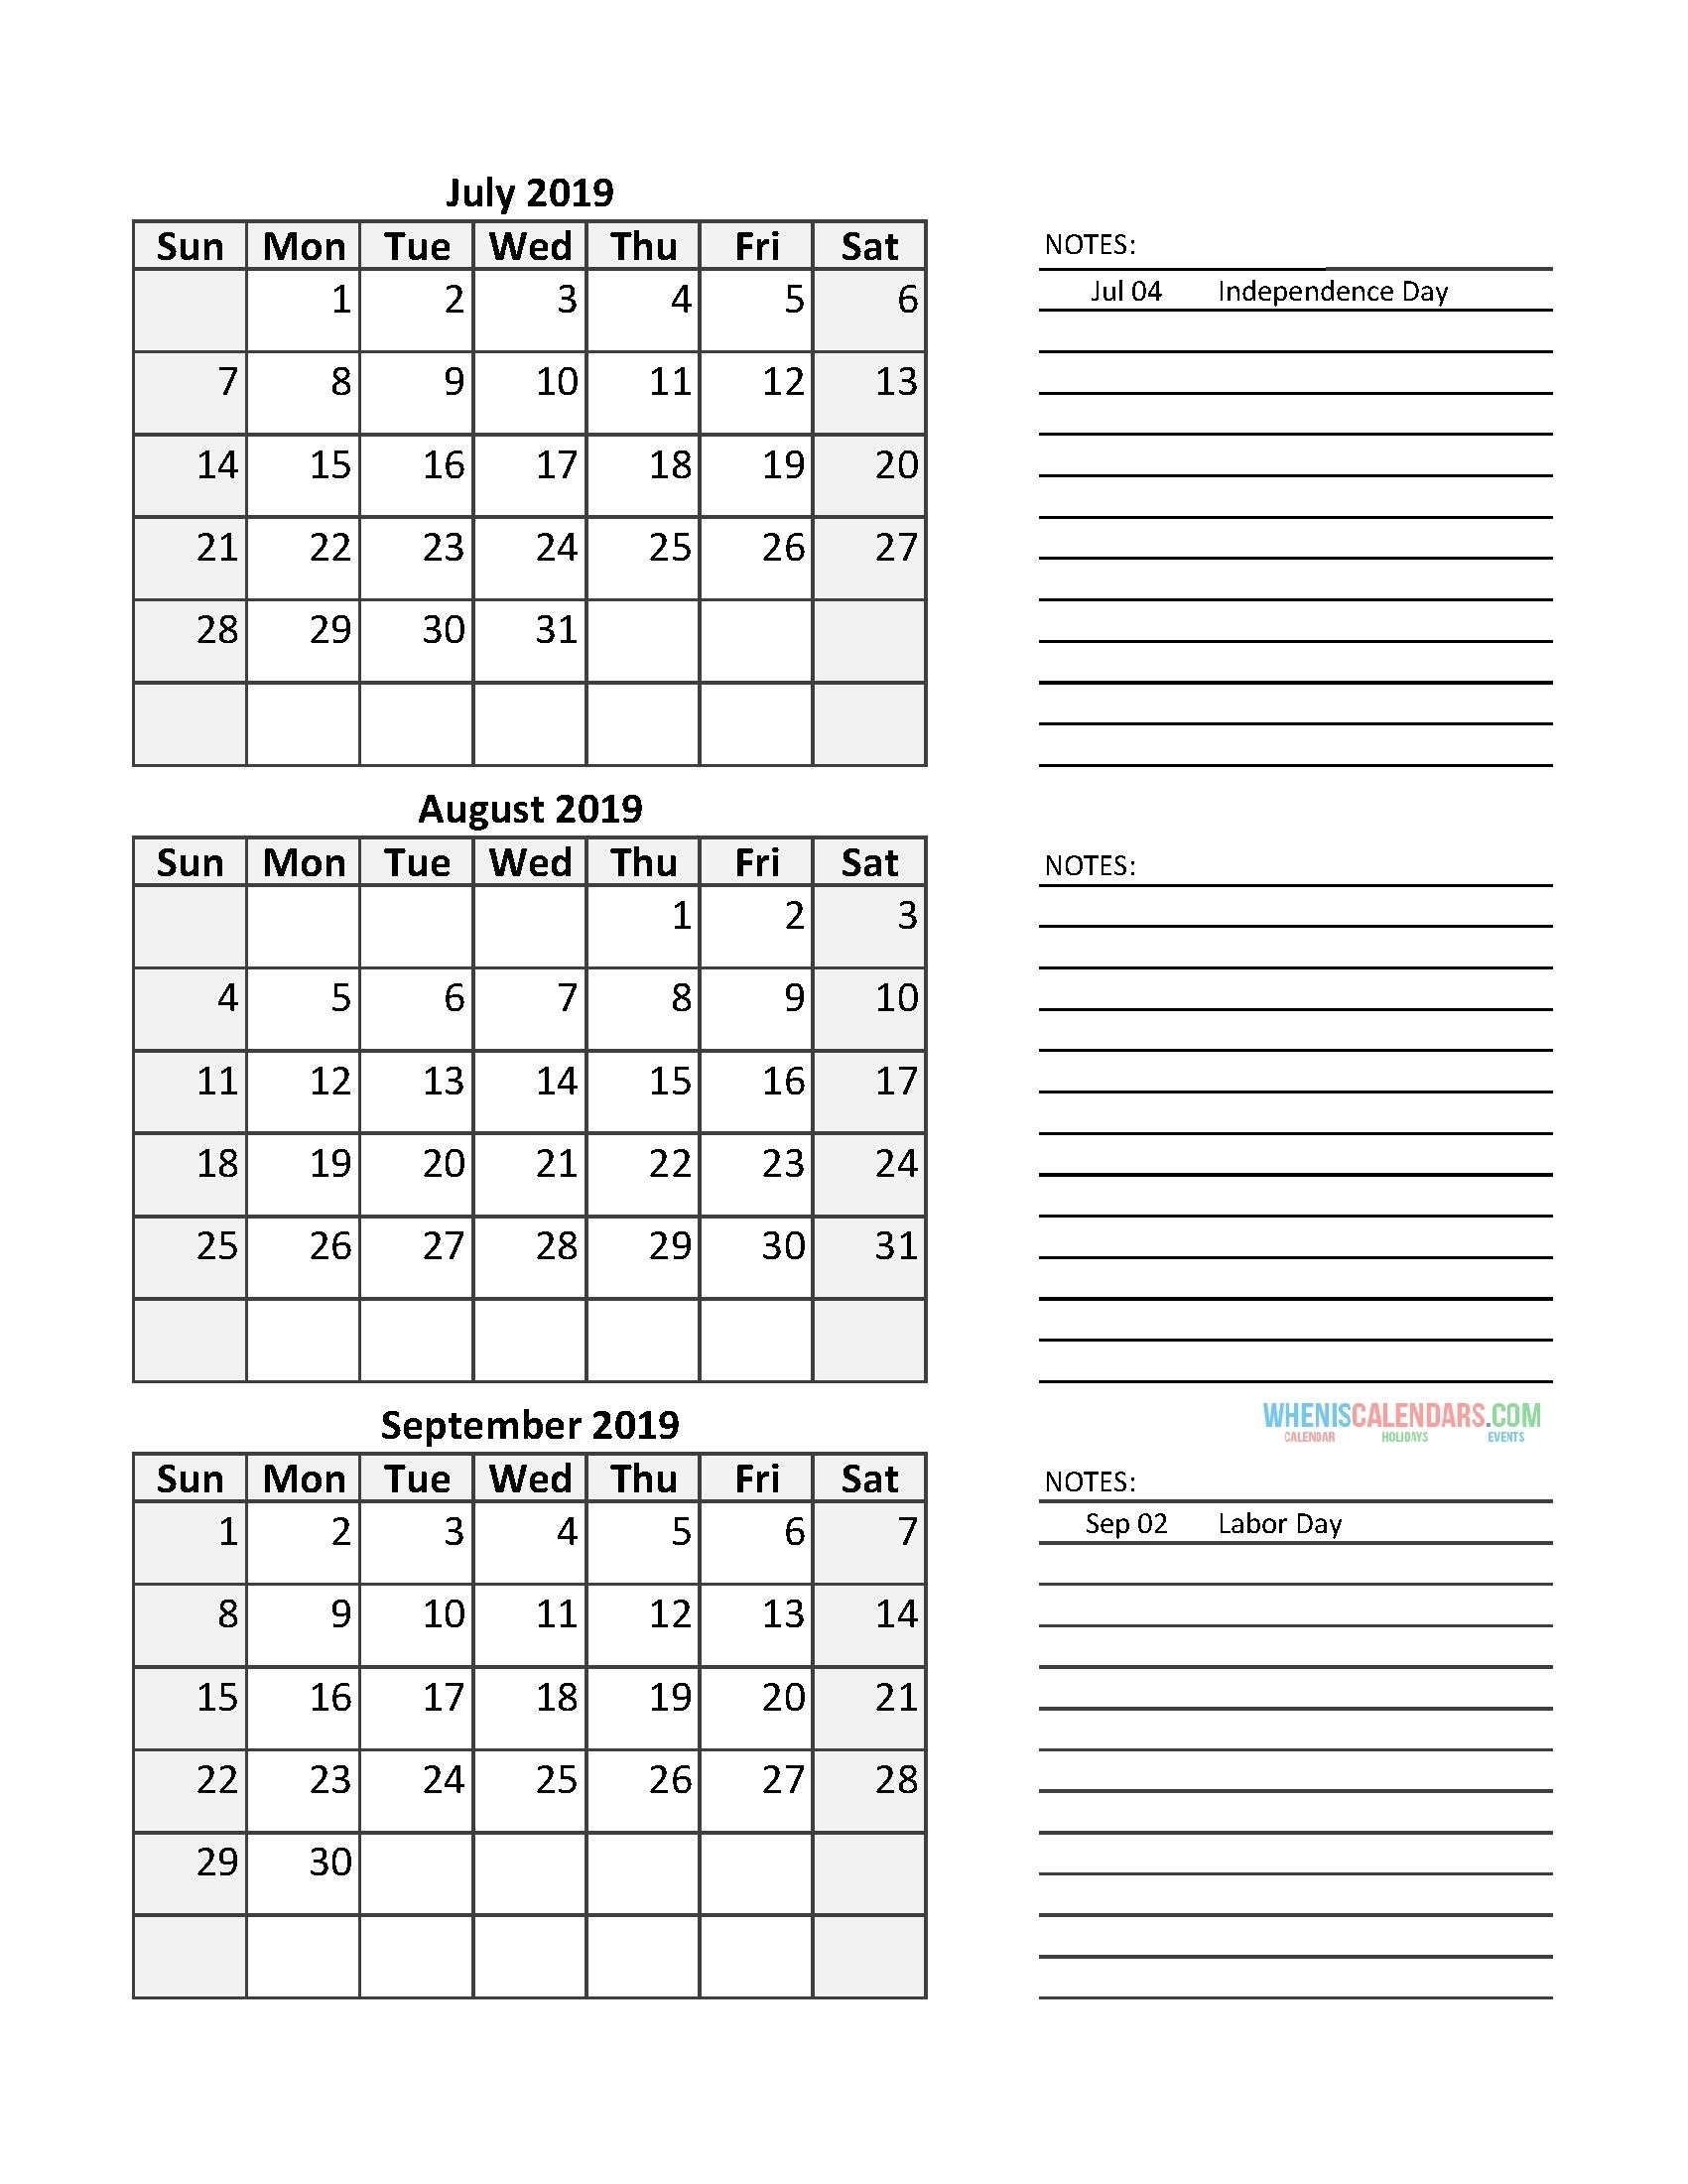 Quarterly Calendar 2019 With Holidays: July August September 2019 Free Check More At Https